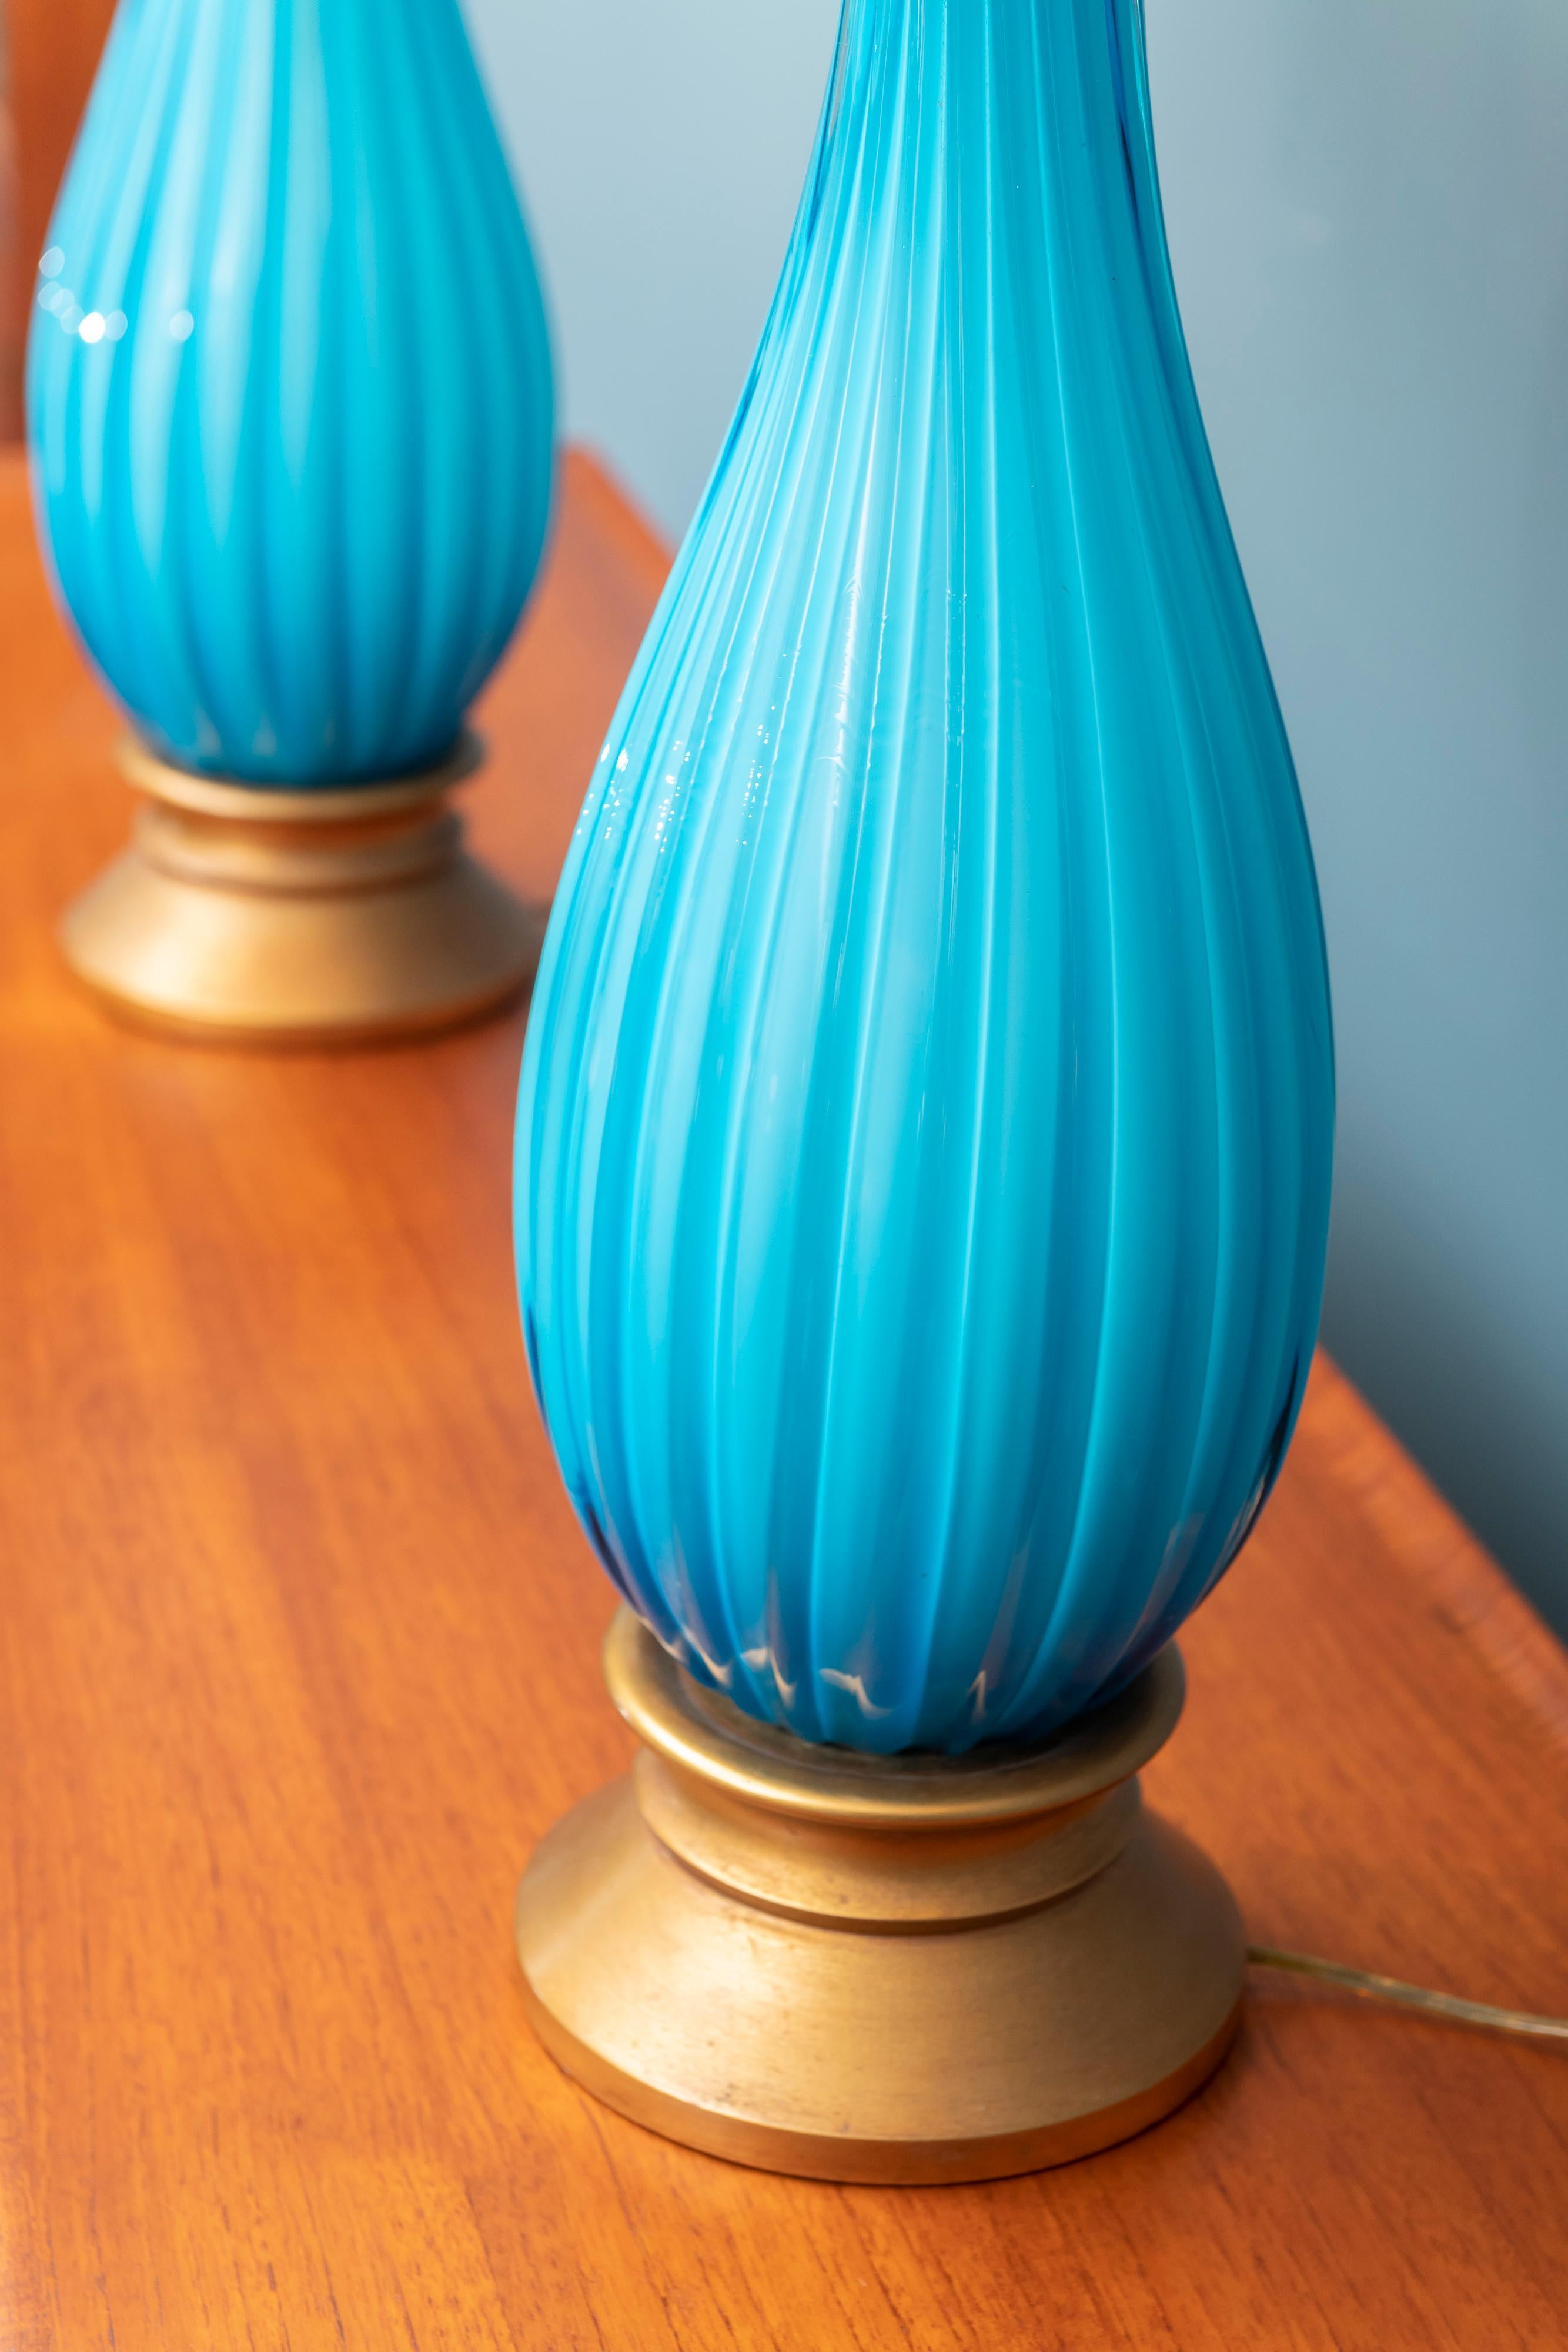 Murano glass table lamps by Mabro, Los Angeles CA. Stunning aqua blue color with brass and gilt metal mounts, shades are by association and in good condition.